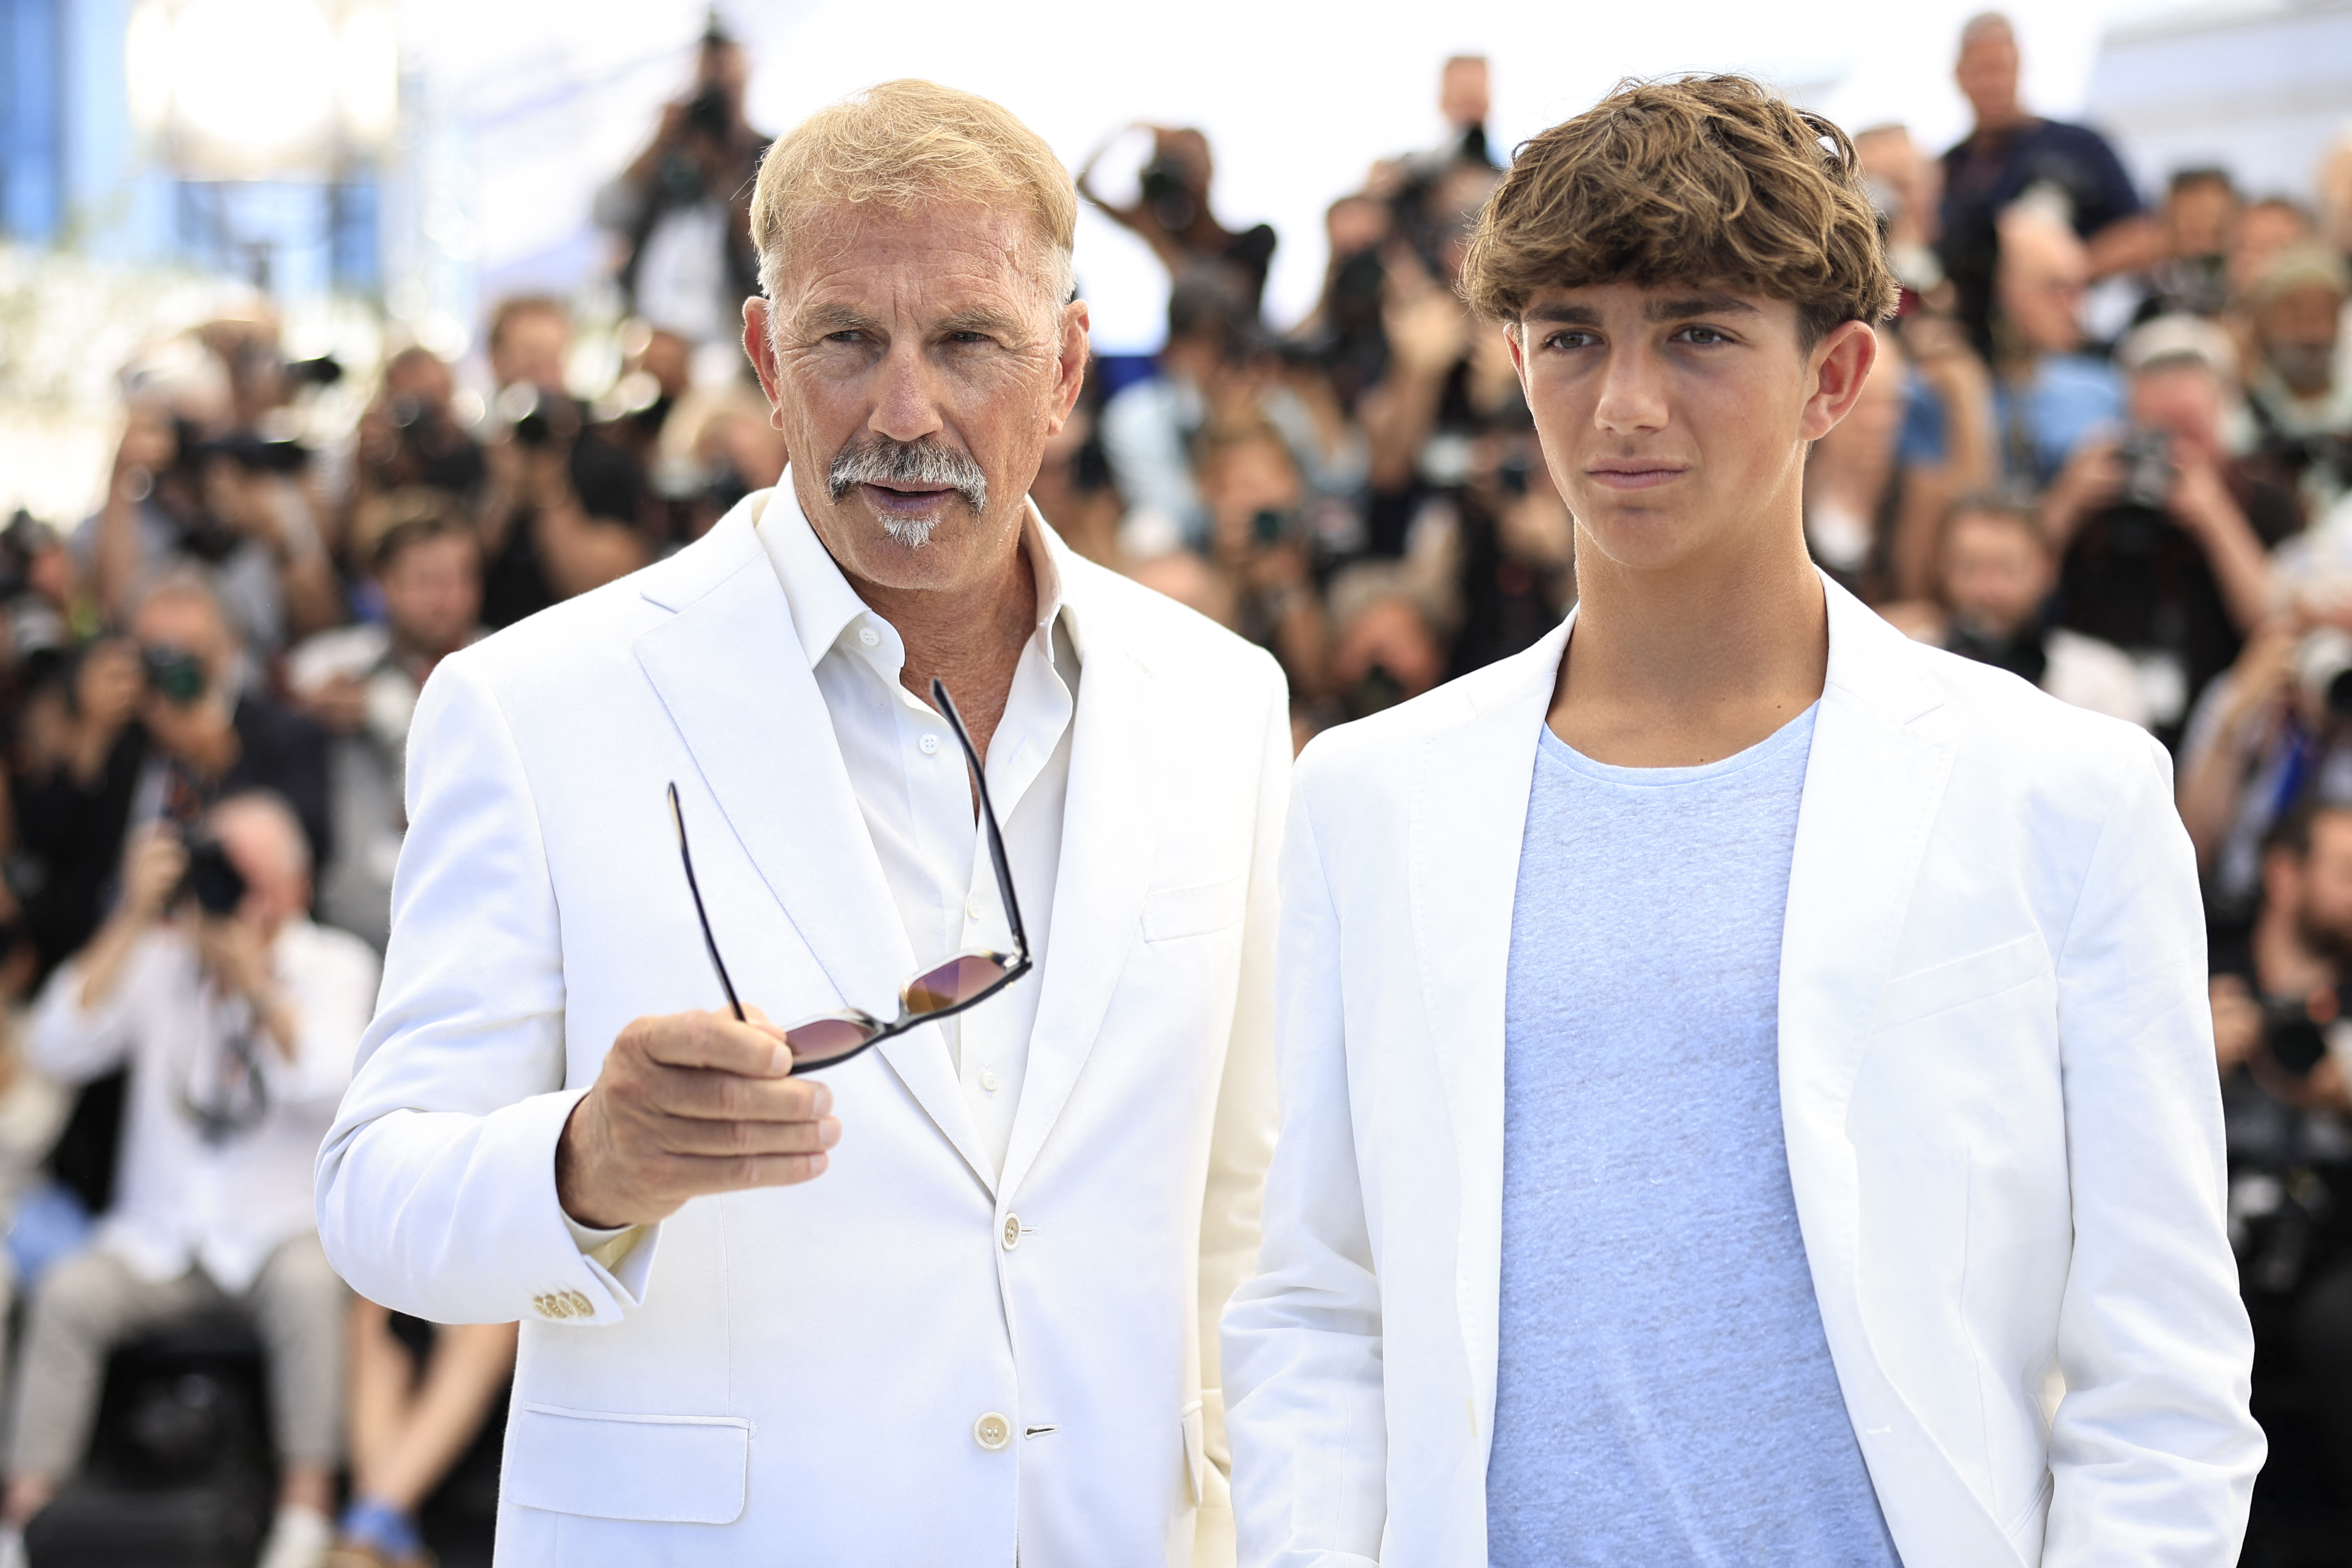 Kevin Costner and Hayes Costner at the Cannes Film Festival in 2024 | Source: Getty Images